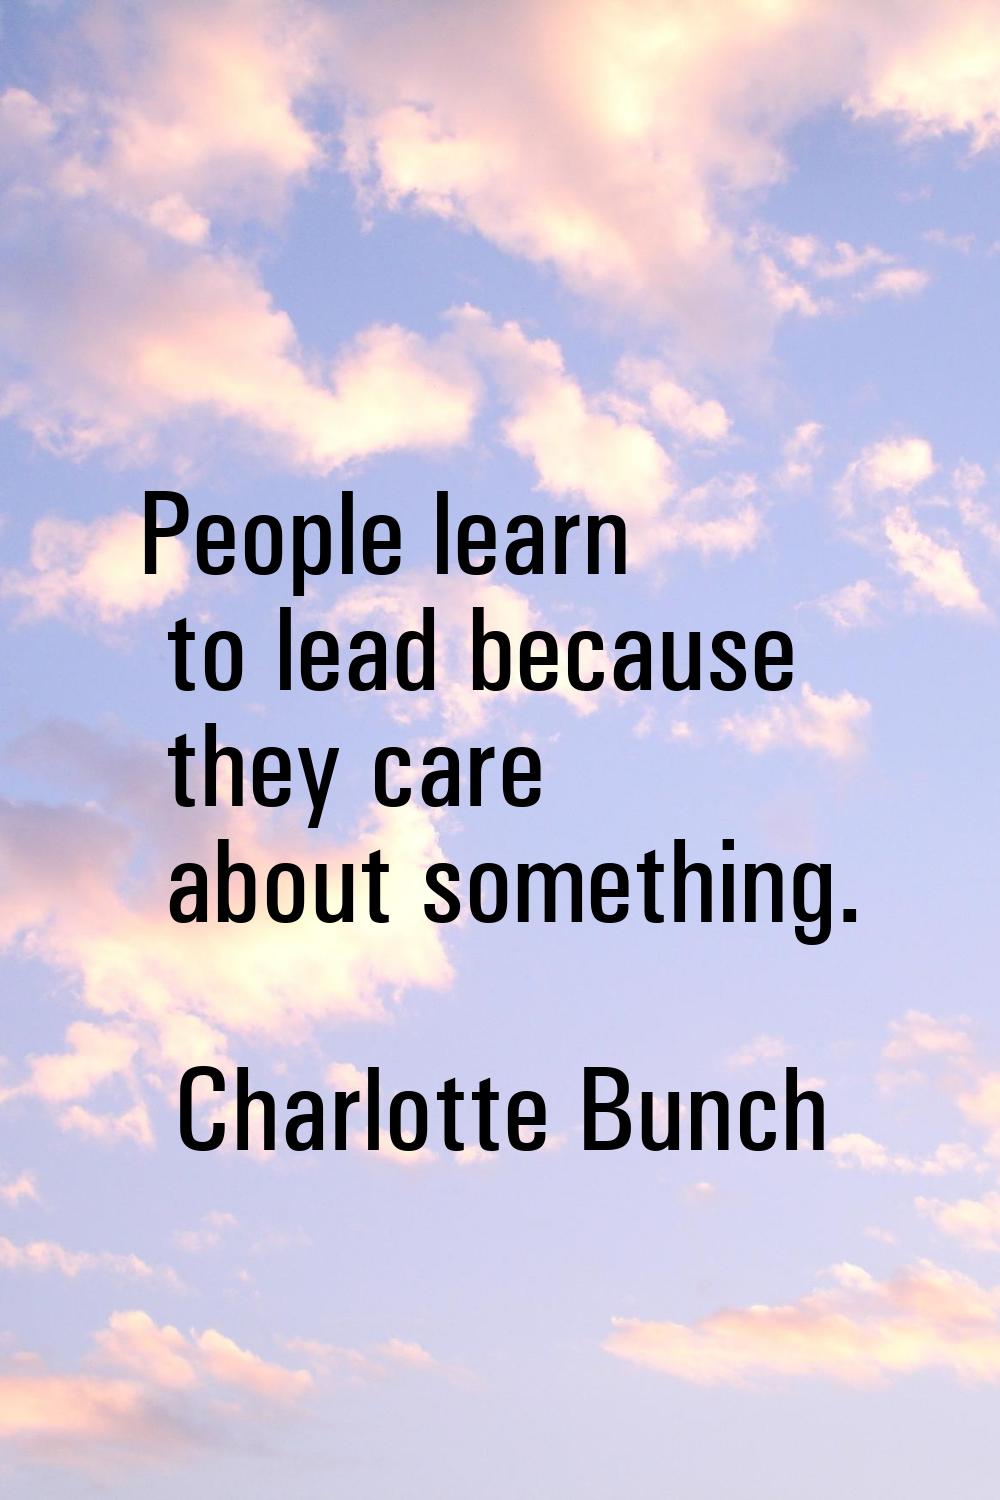 People learn to lead because they care about something.